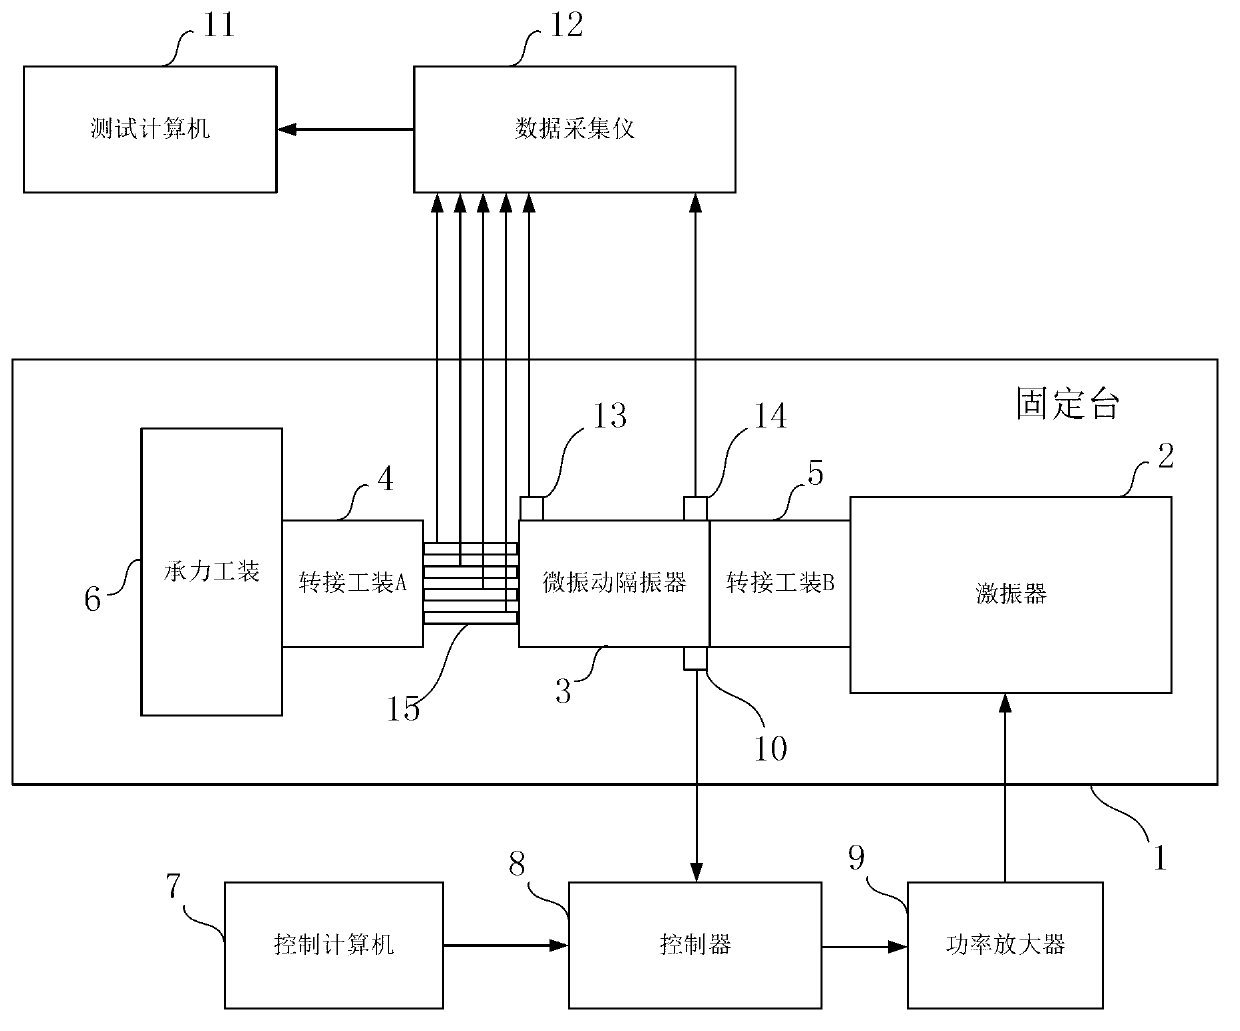 Micro-vibration vibration isolator damping parameter and rigidity parameter measuring device